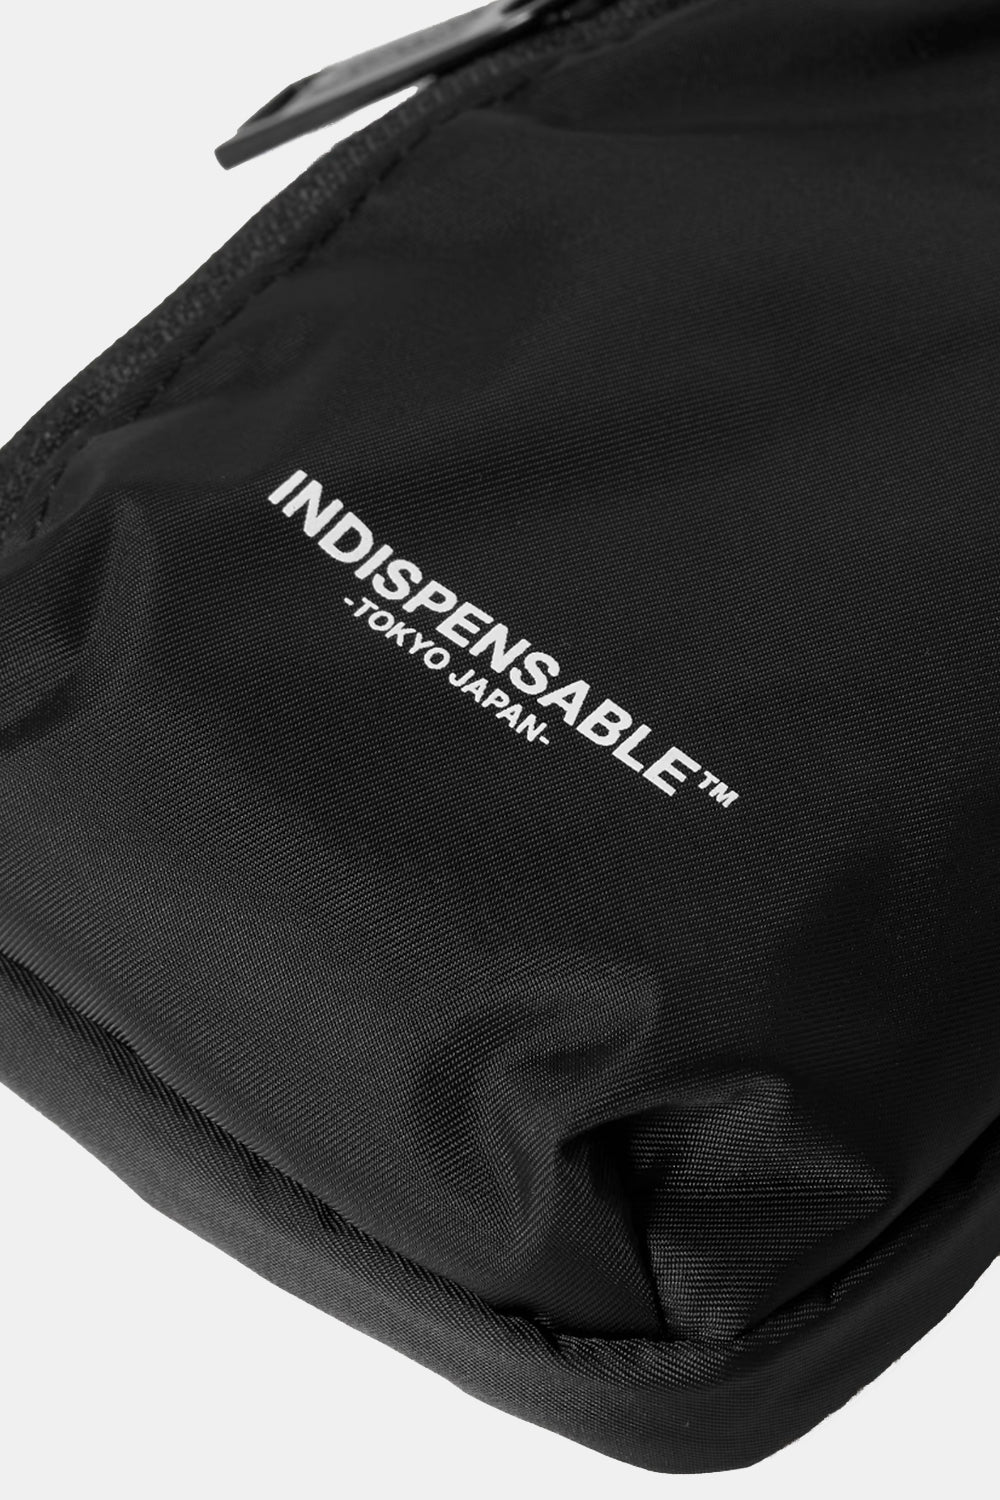 Indispensable IDP Neck Pouch Cell Econyl (Black)